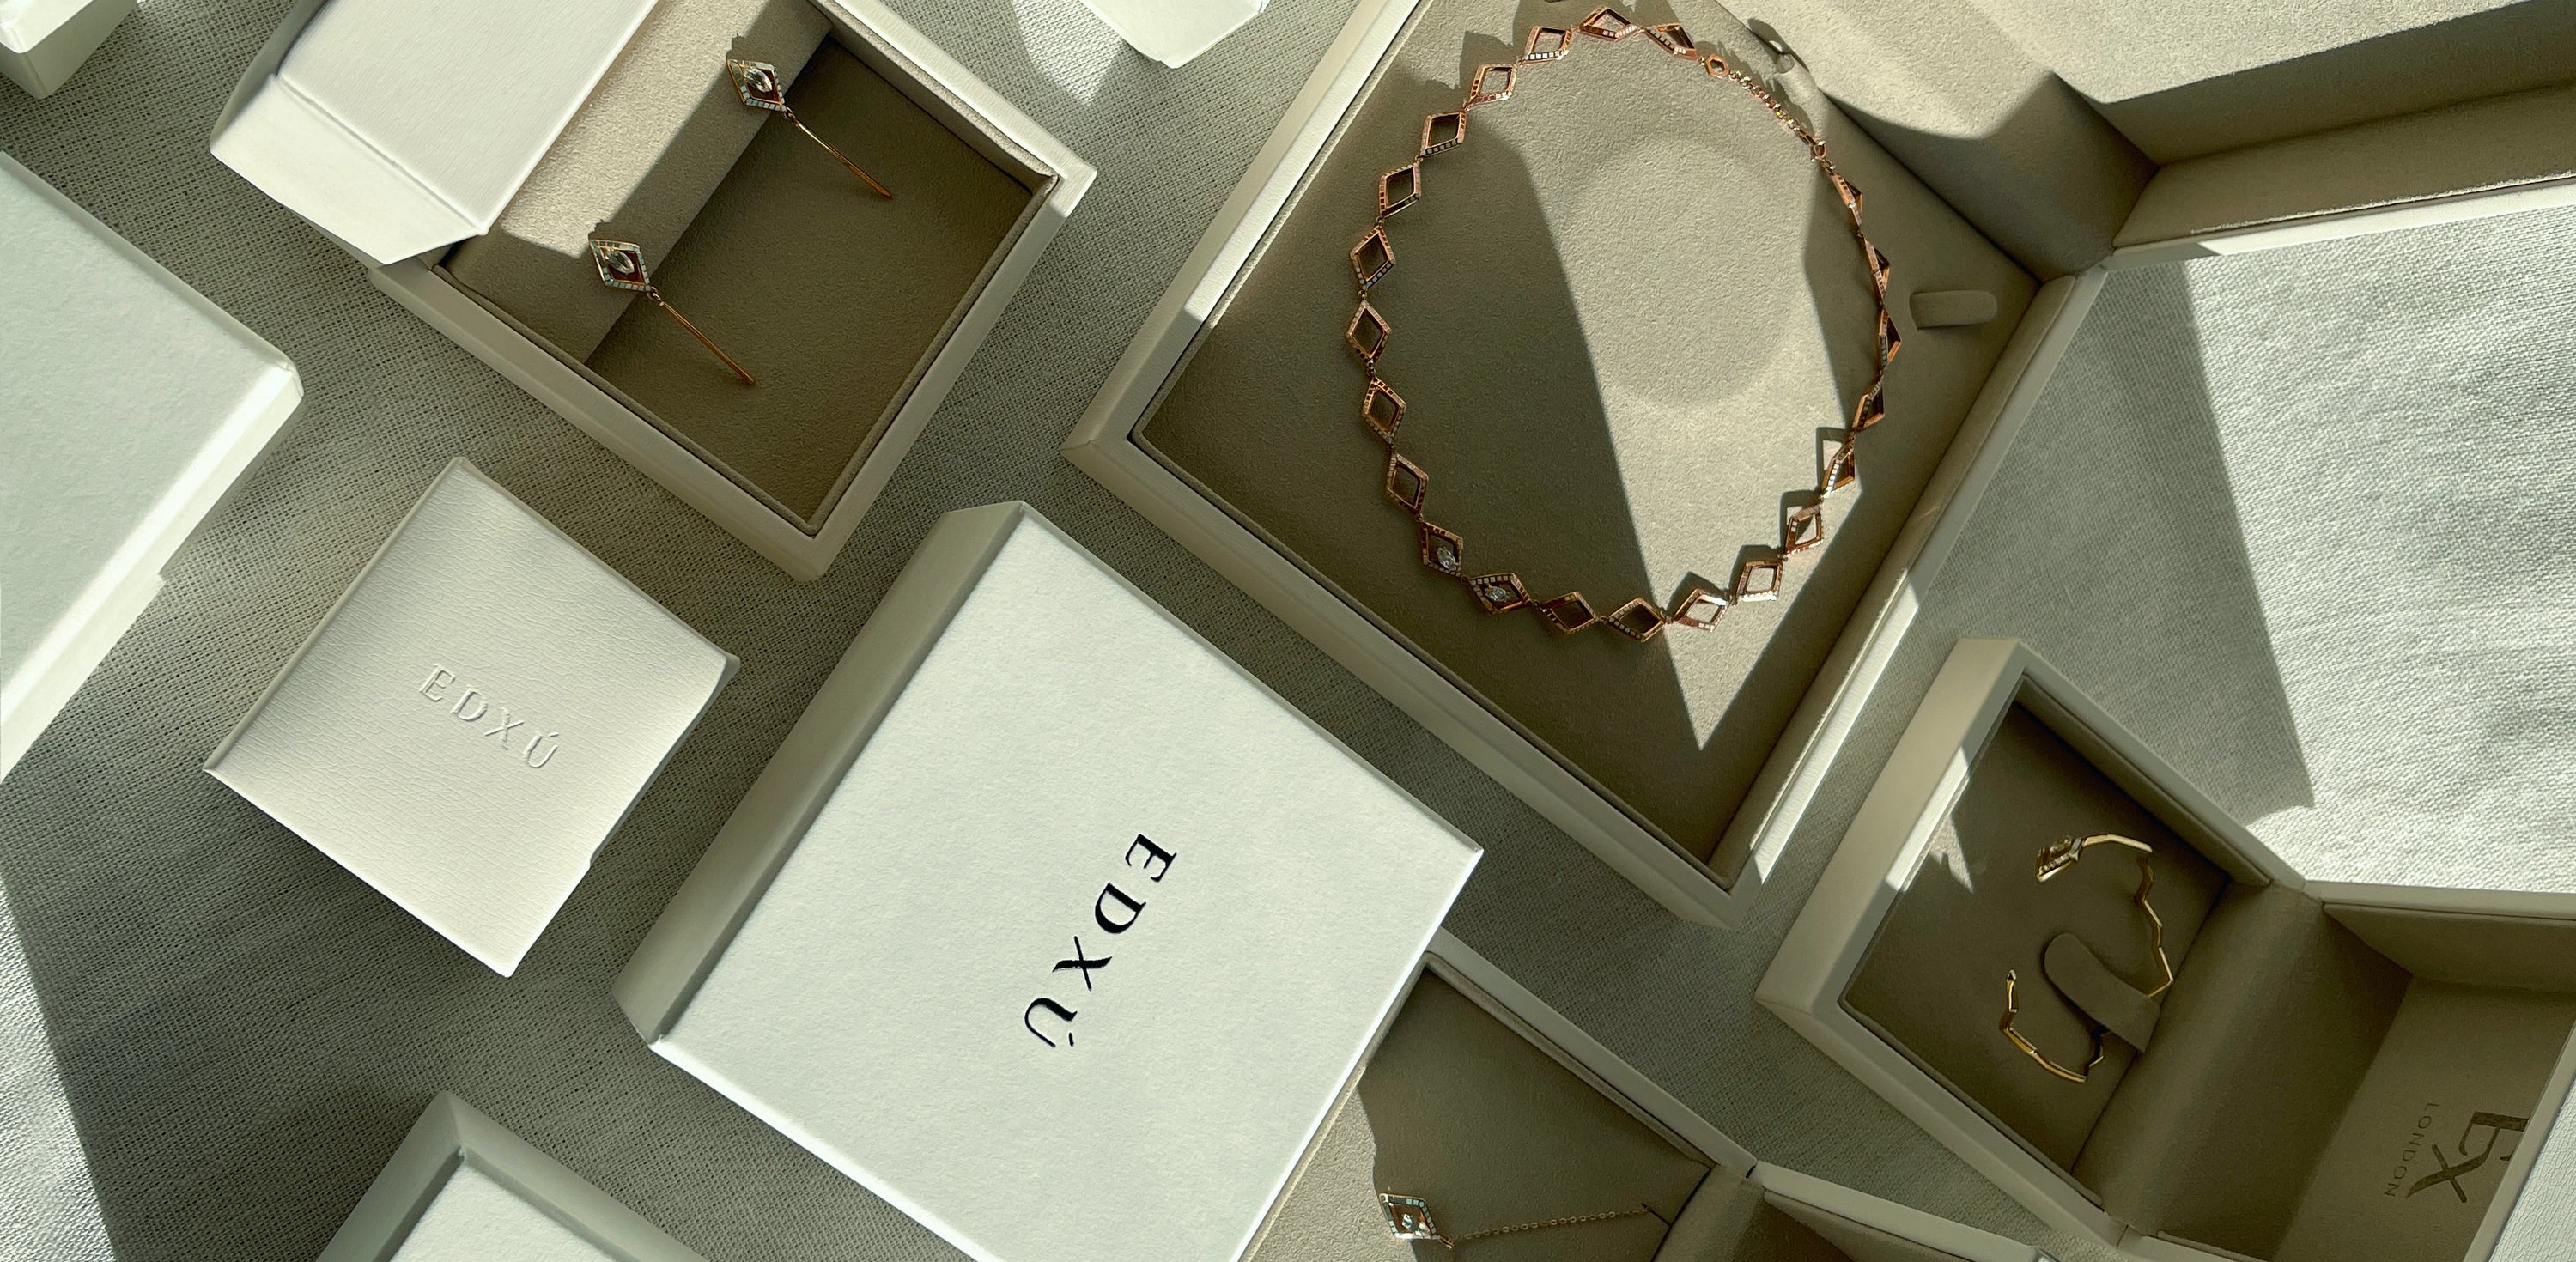 Variety of bespoke bridal jewelery in boxes, made by Independent jeweller EDXU